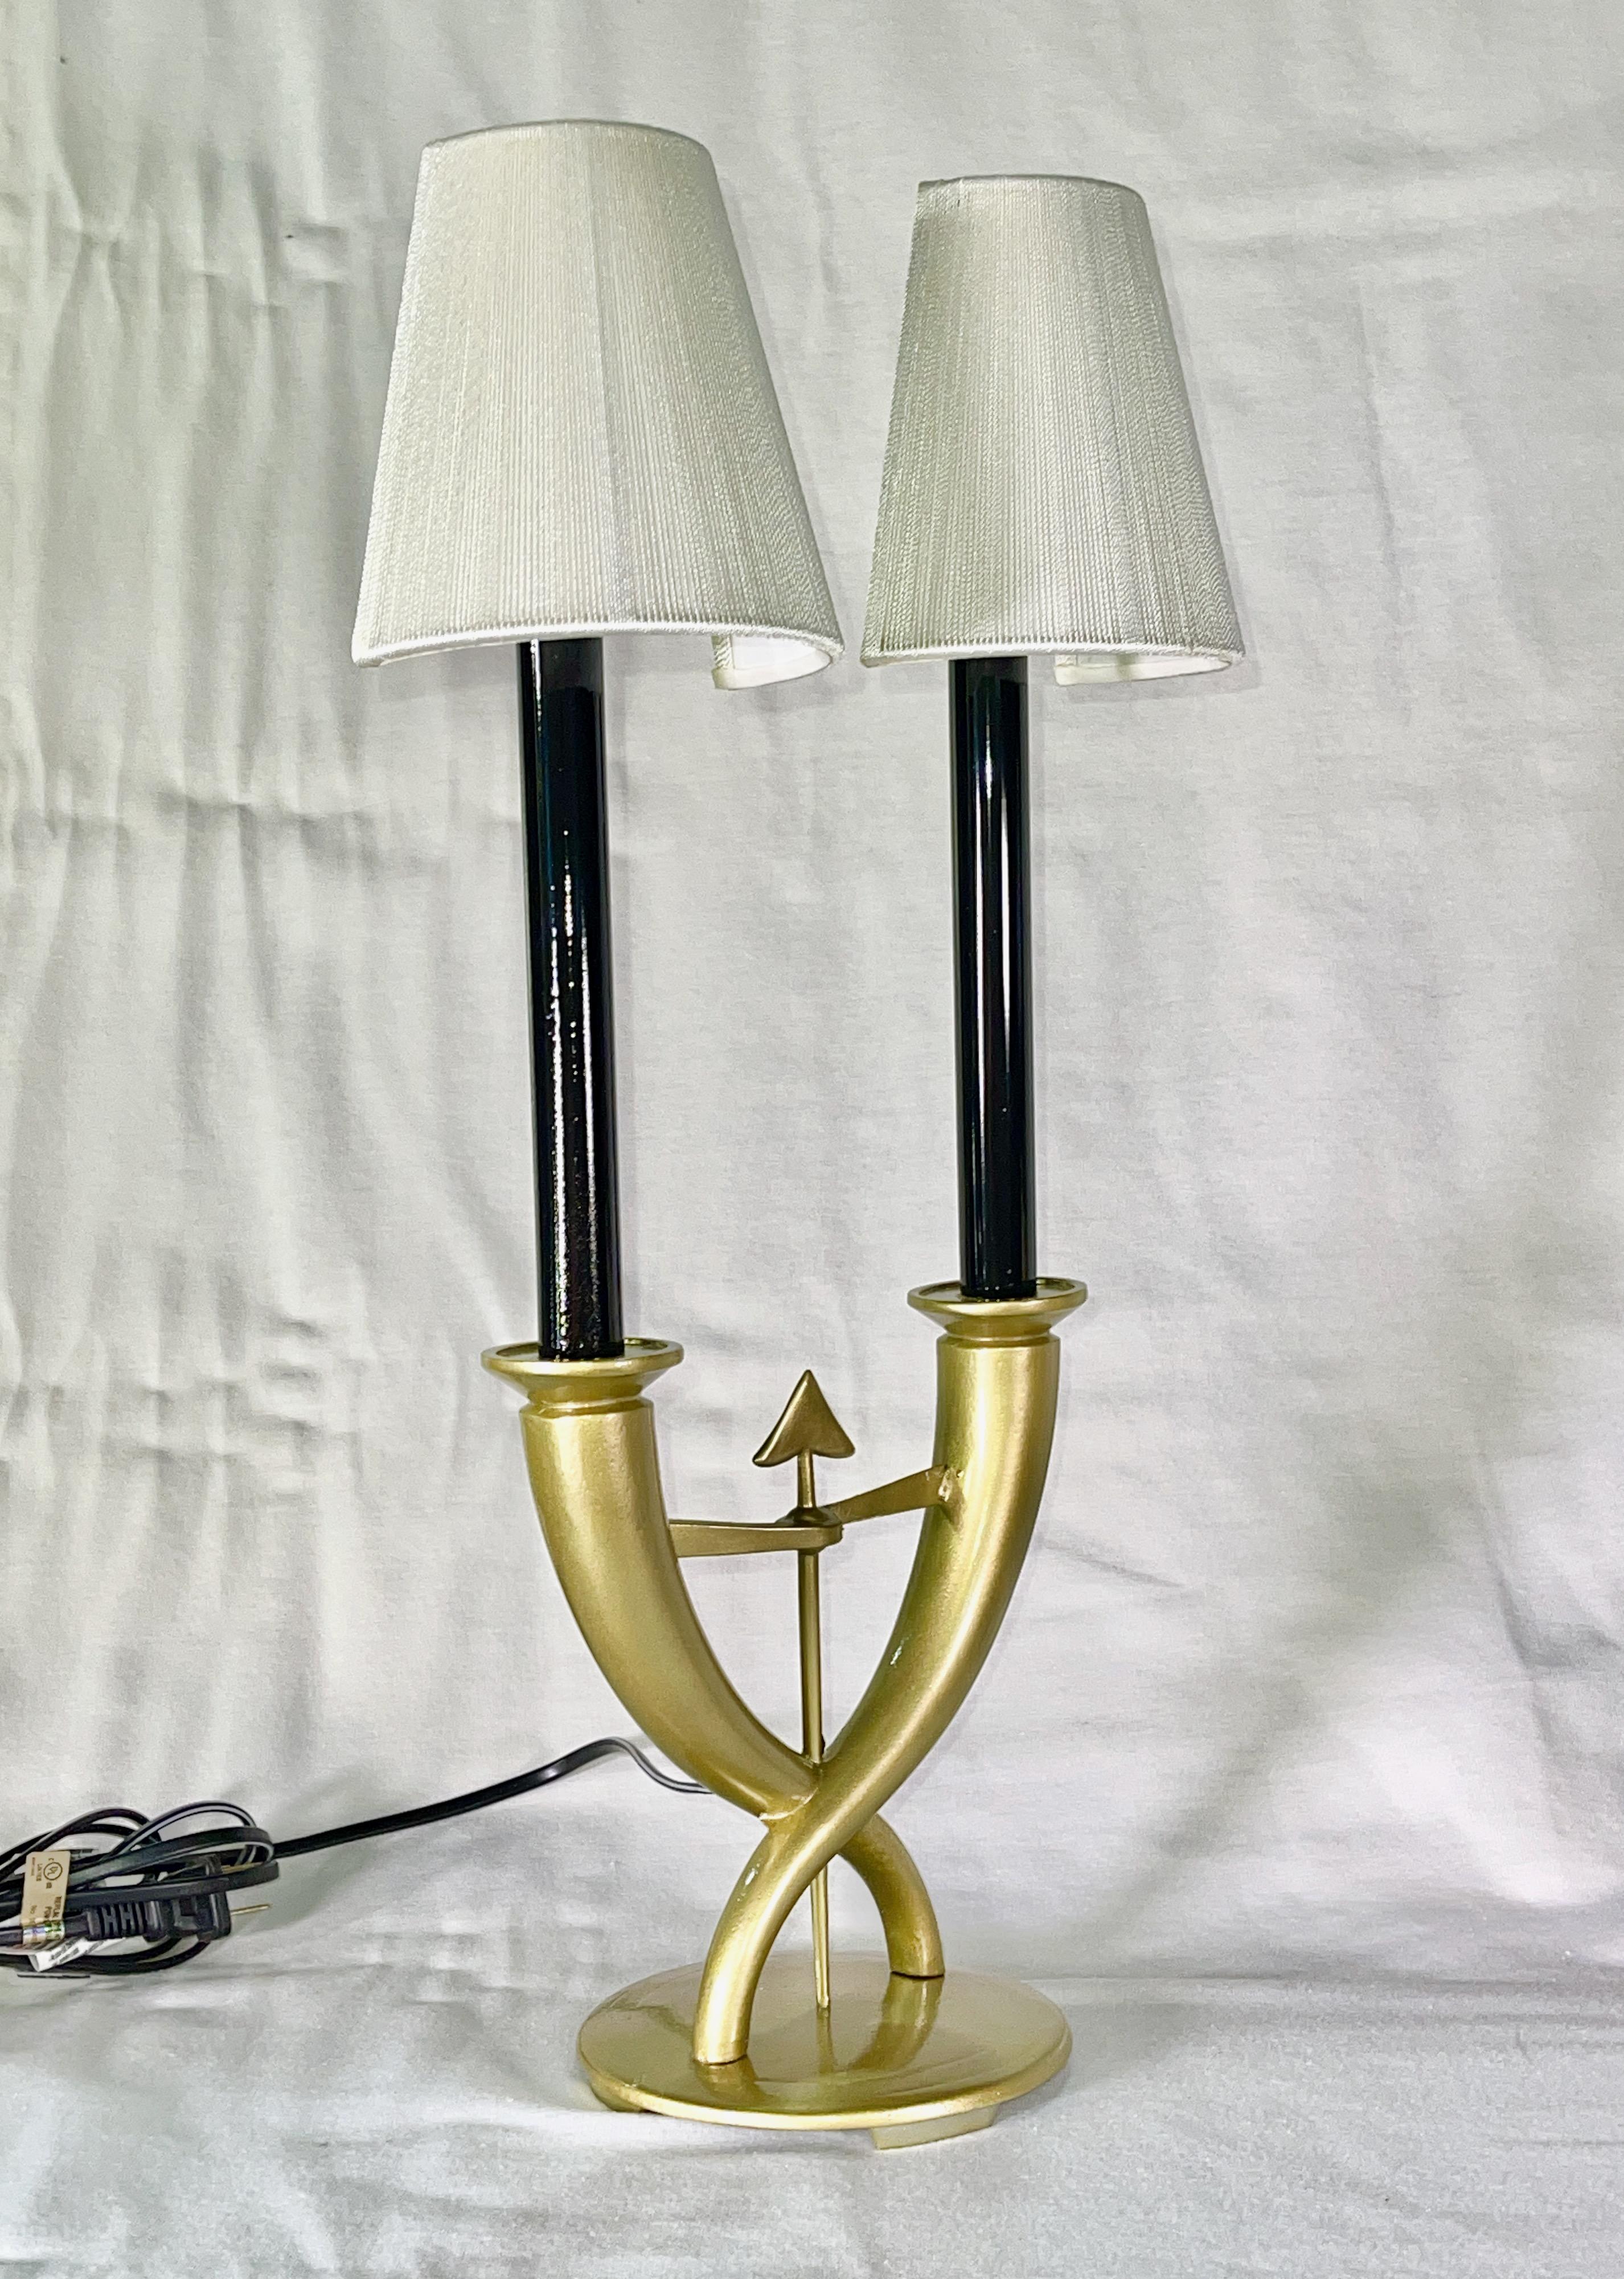 Mid-20th Century Pair of Gio Ponti Candelabra Fleche Lamps For Sale